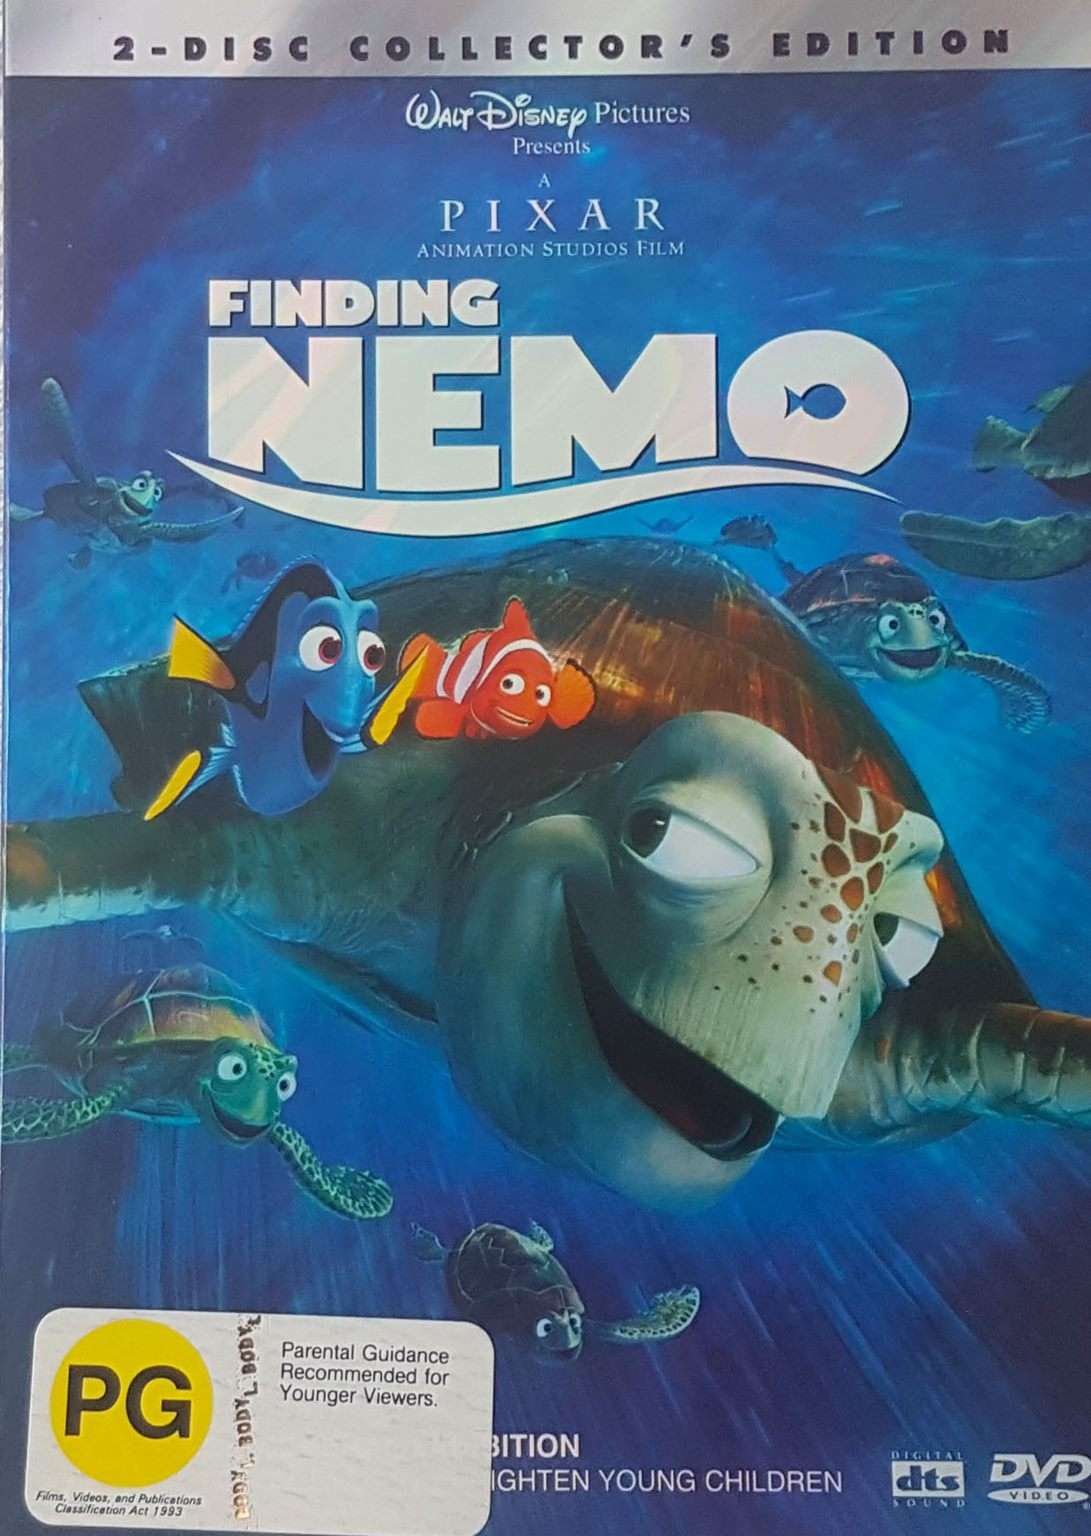 Finding Nemo 2 Disc Collector's Edition